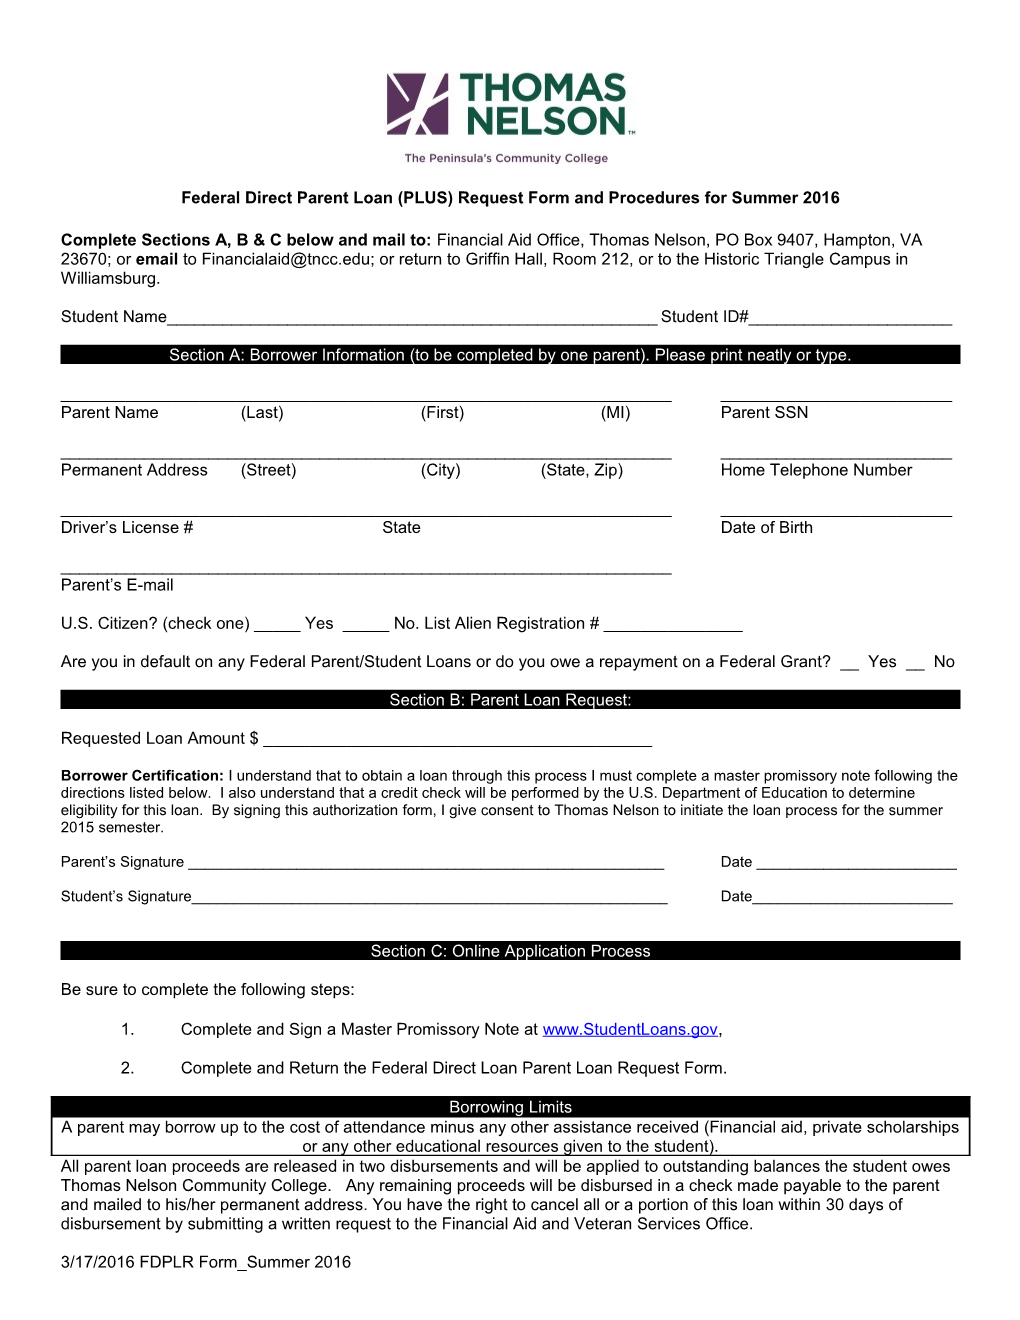 Federal Direct Parent Loan (PLUS) Request Form and Procedures for Summer 2016